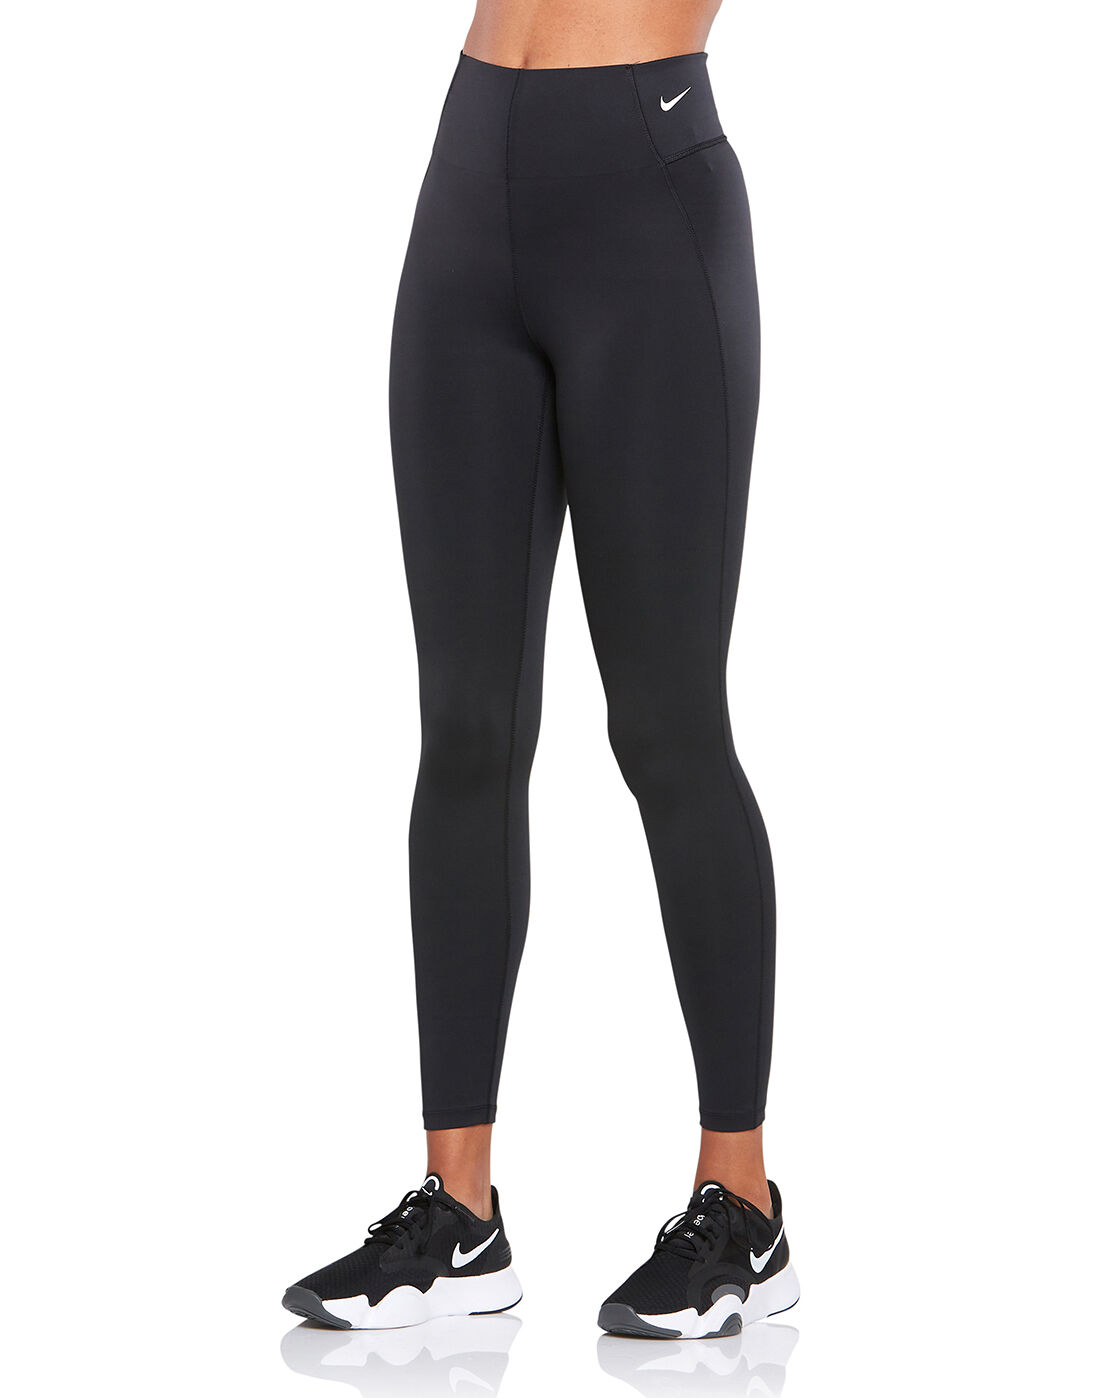 nike victory tight